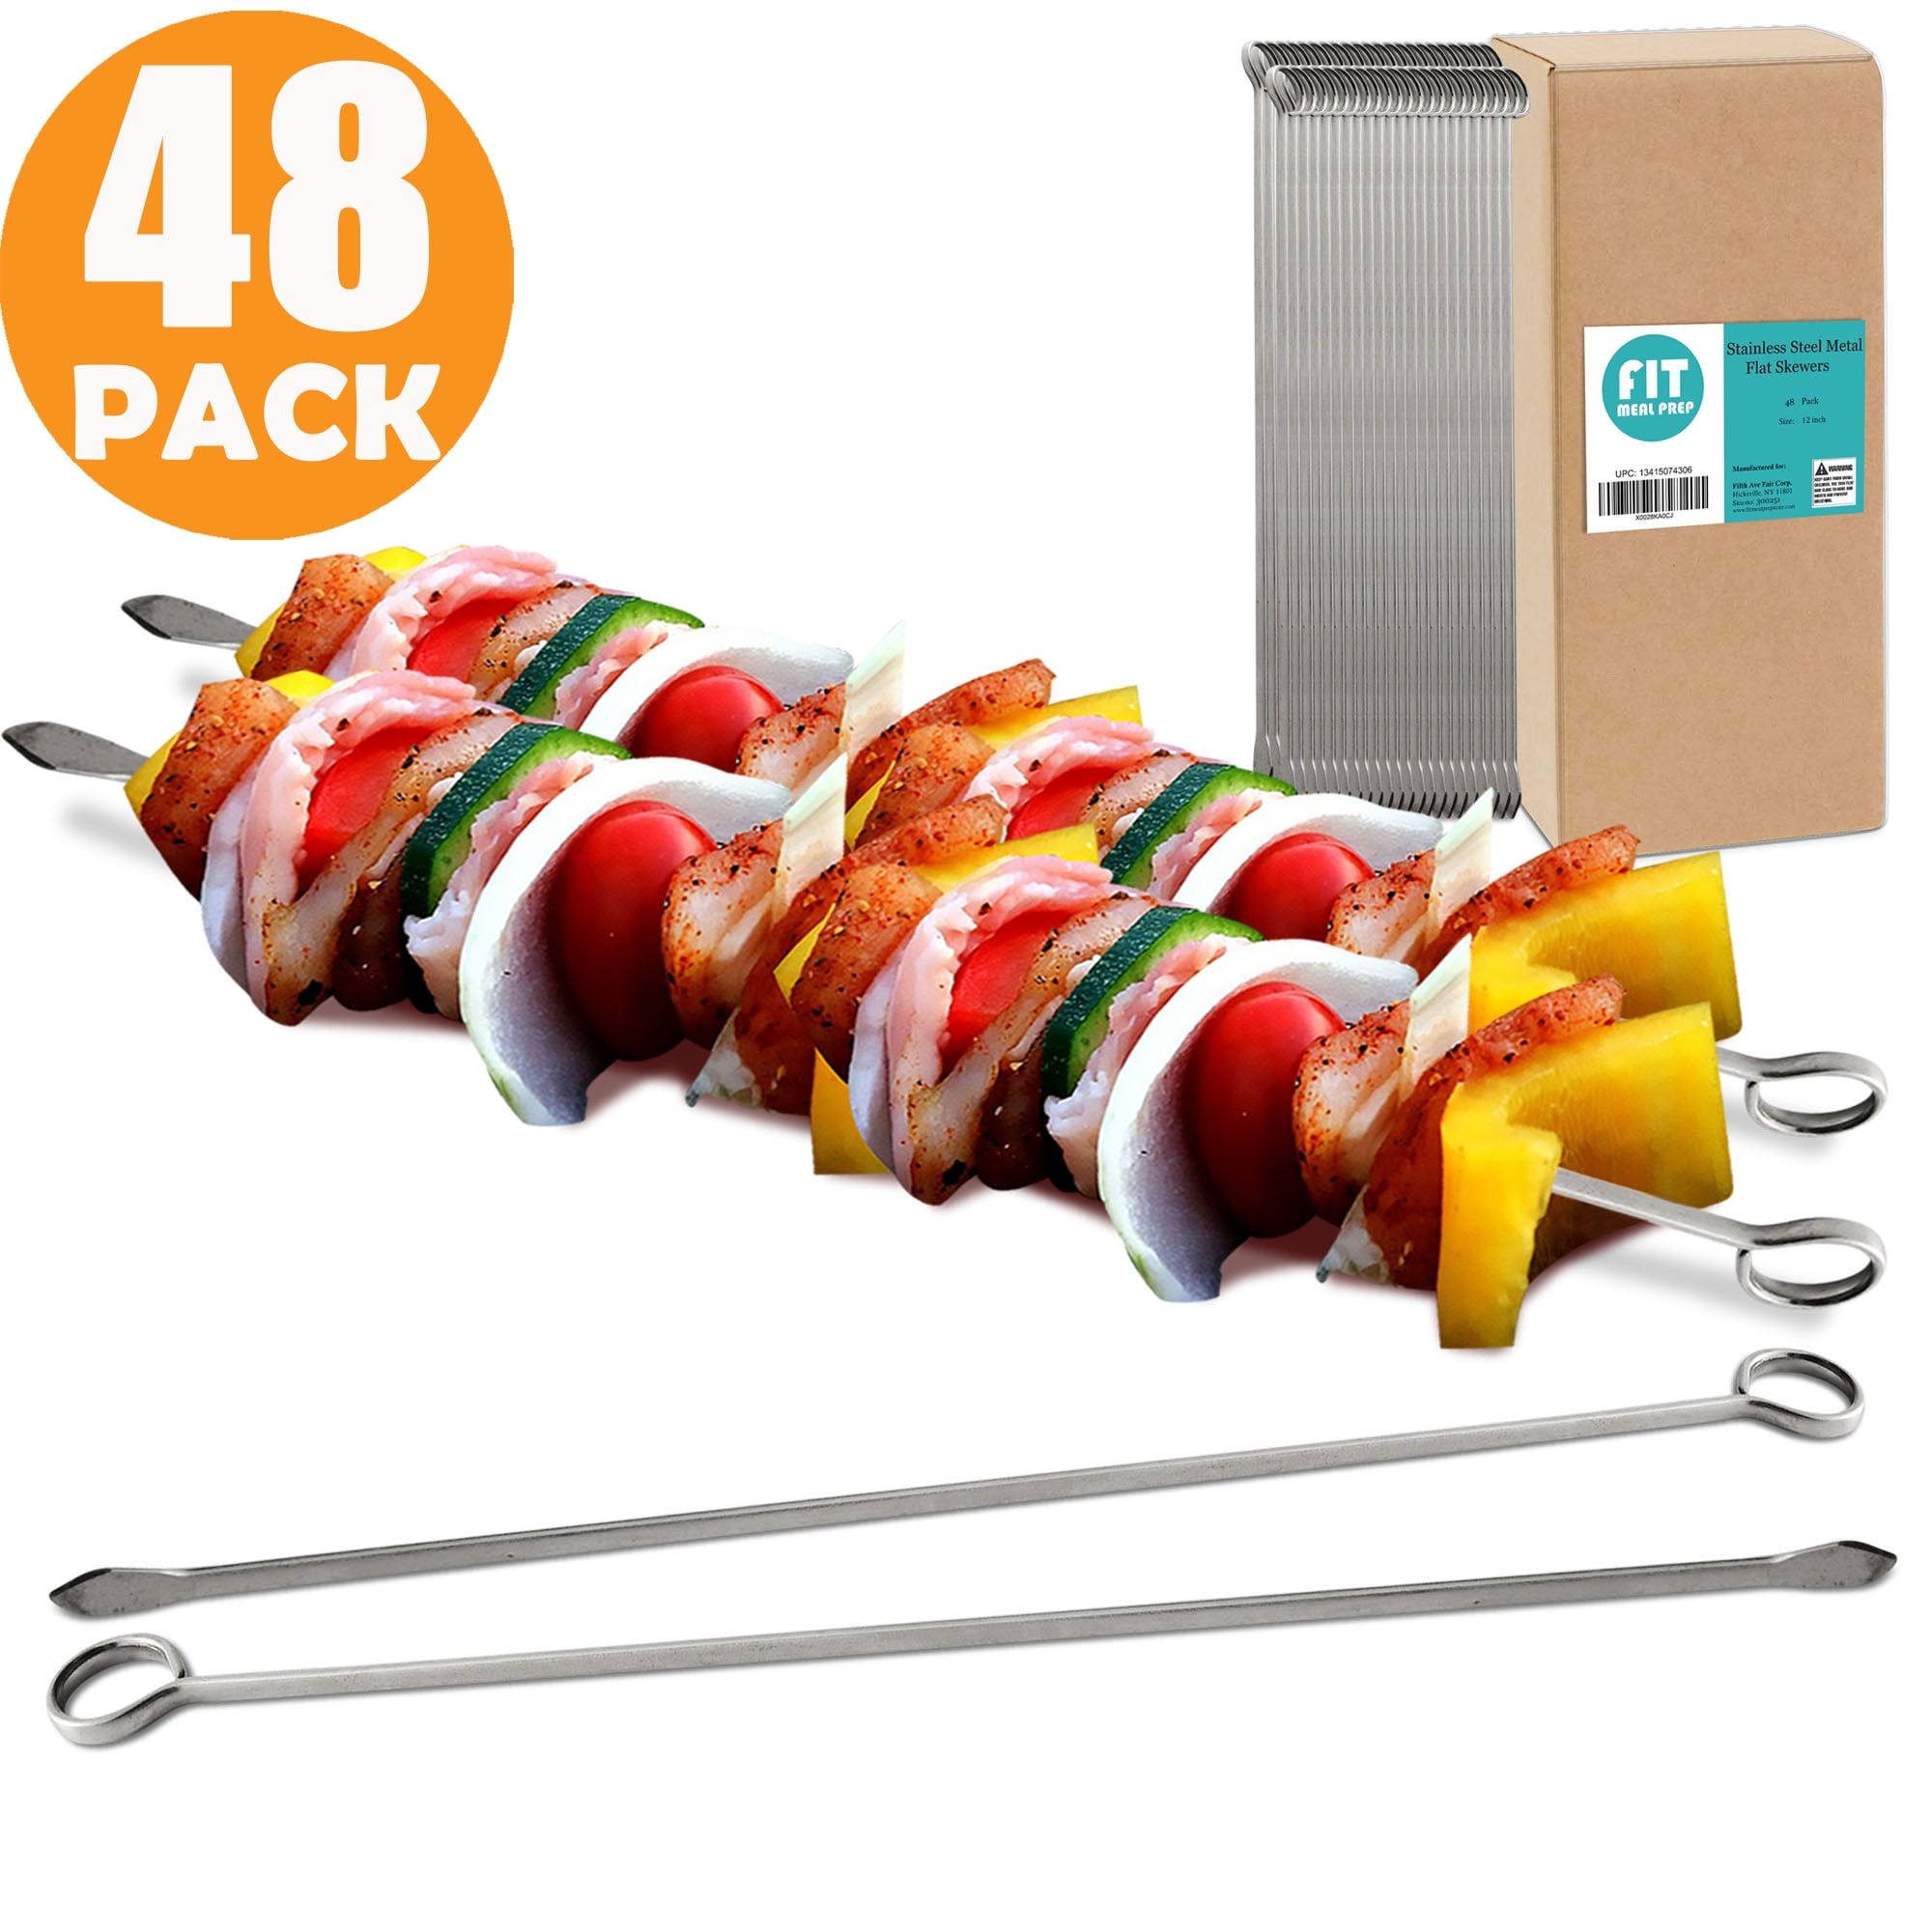 BAMBOO CATERING SKEWERS BBQ PARTY PICK PICNIC S GRILL COCKTAIL STICKS SNACK BULk 